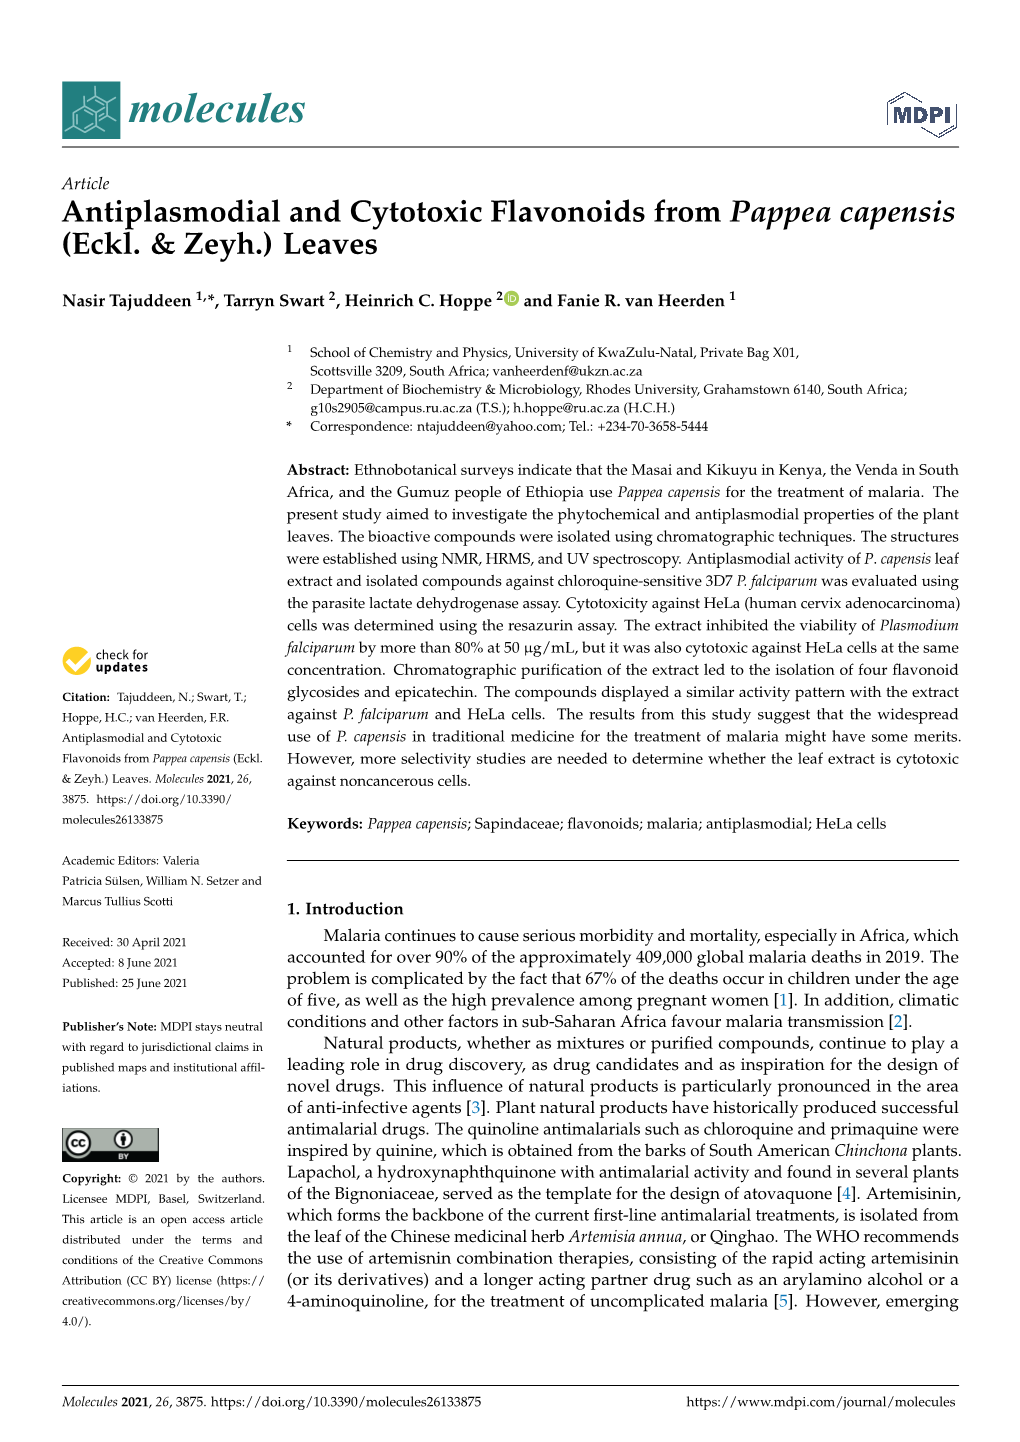 Antiplasmodial and Cytotoxic Flavonoids from Pappea Capensis (Eckl